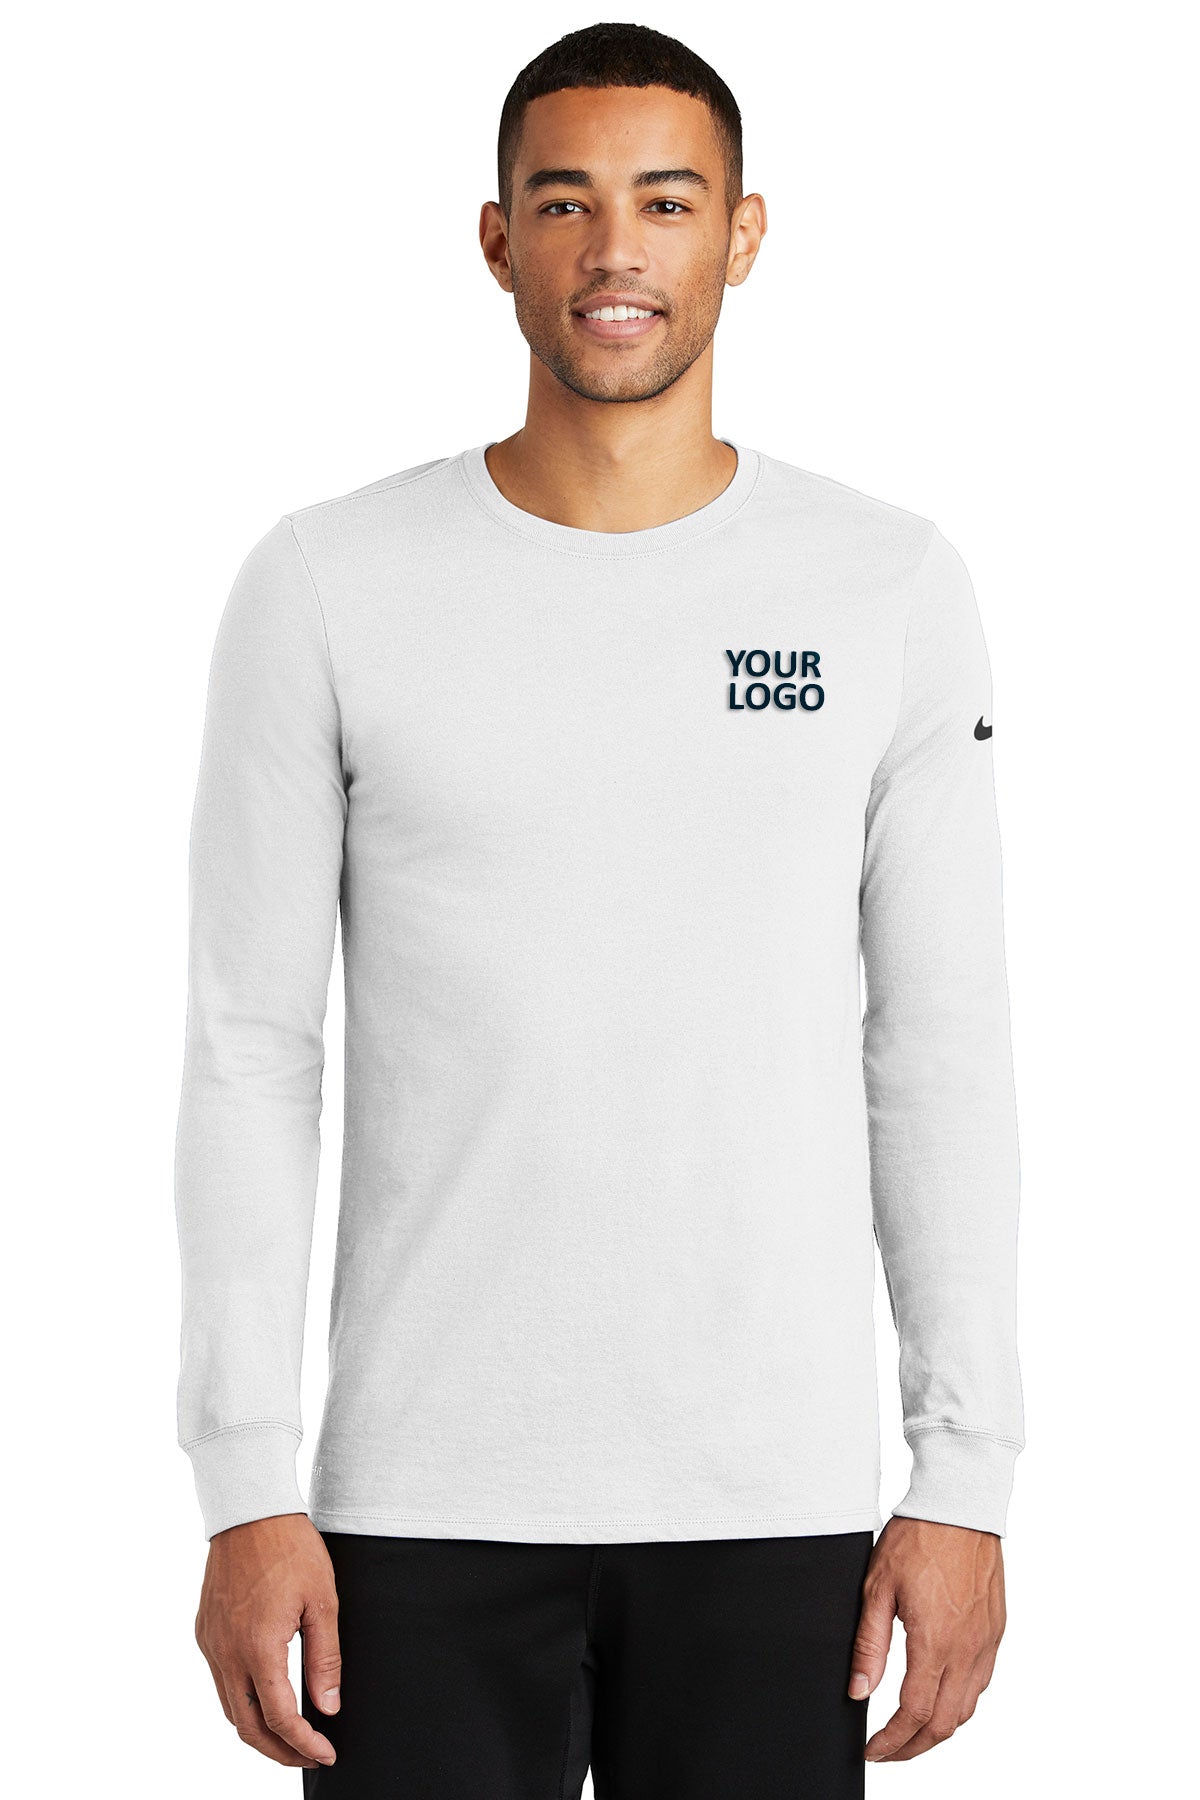 Nike Dri-FIT Cotton/Poly Long Sleeve Tee White [Launch by Lead Apparel]